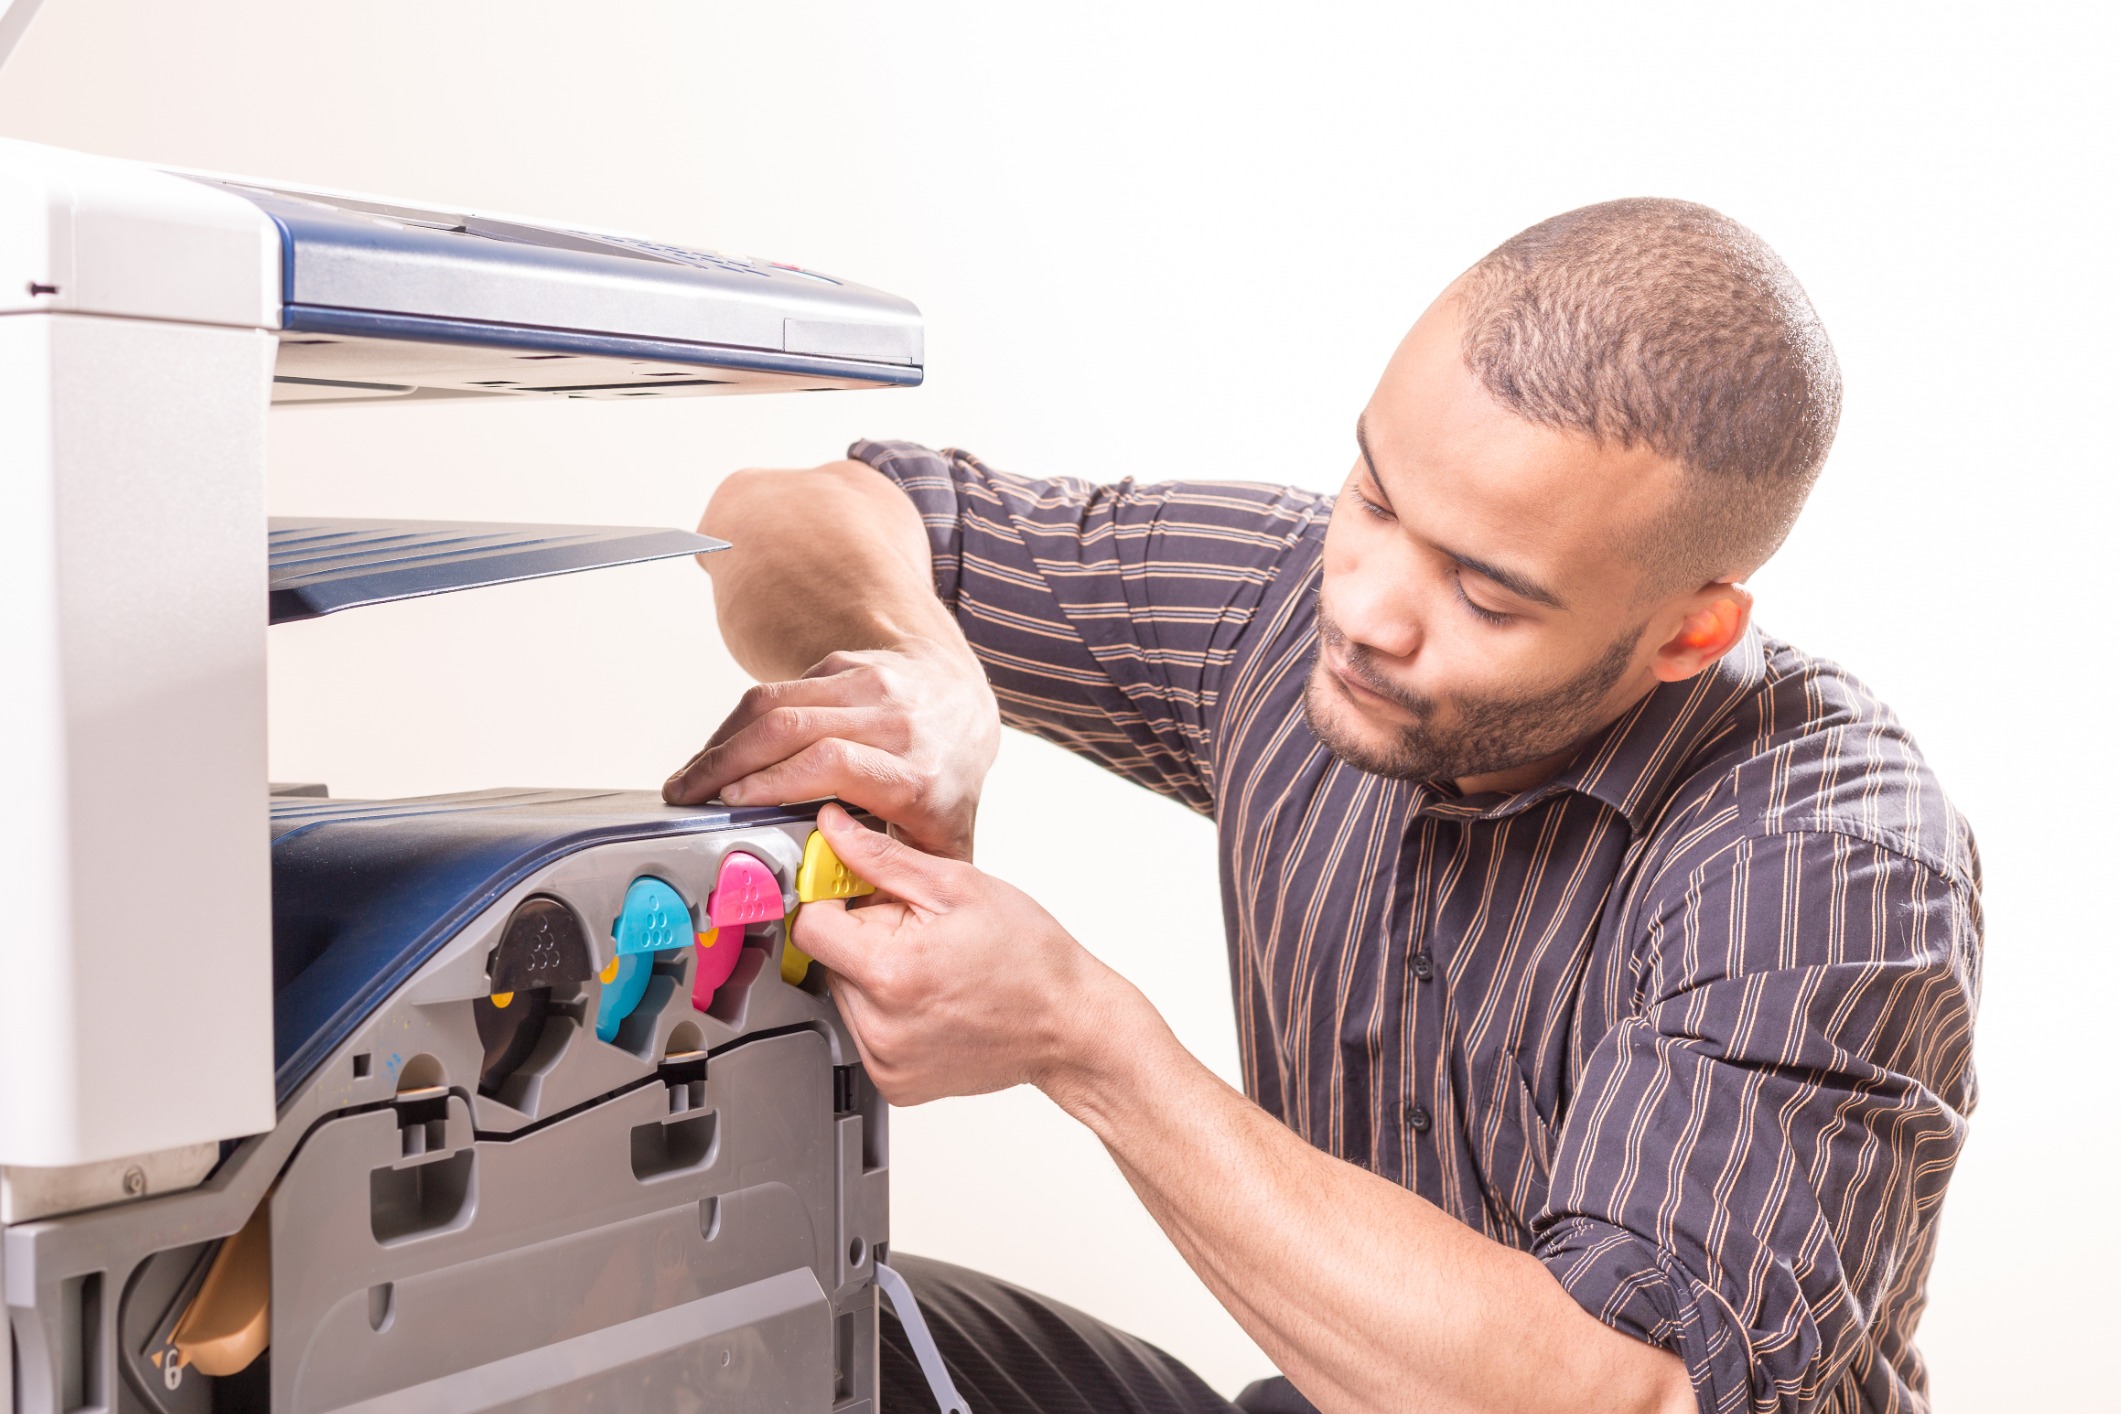 Finding a Copier Service: How to Hire the Right Provider